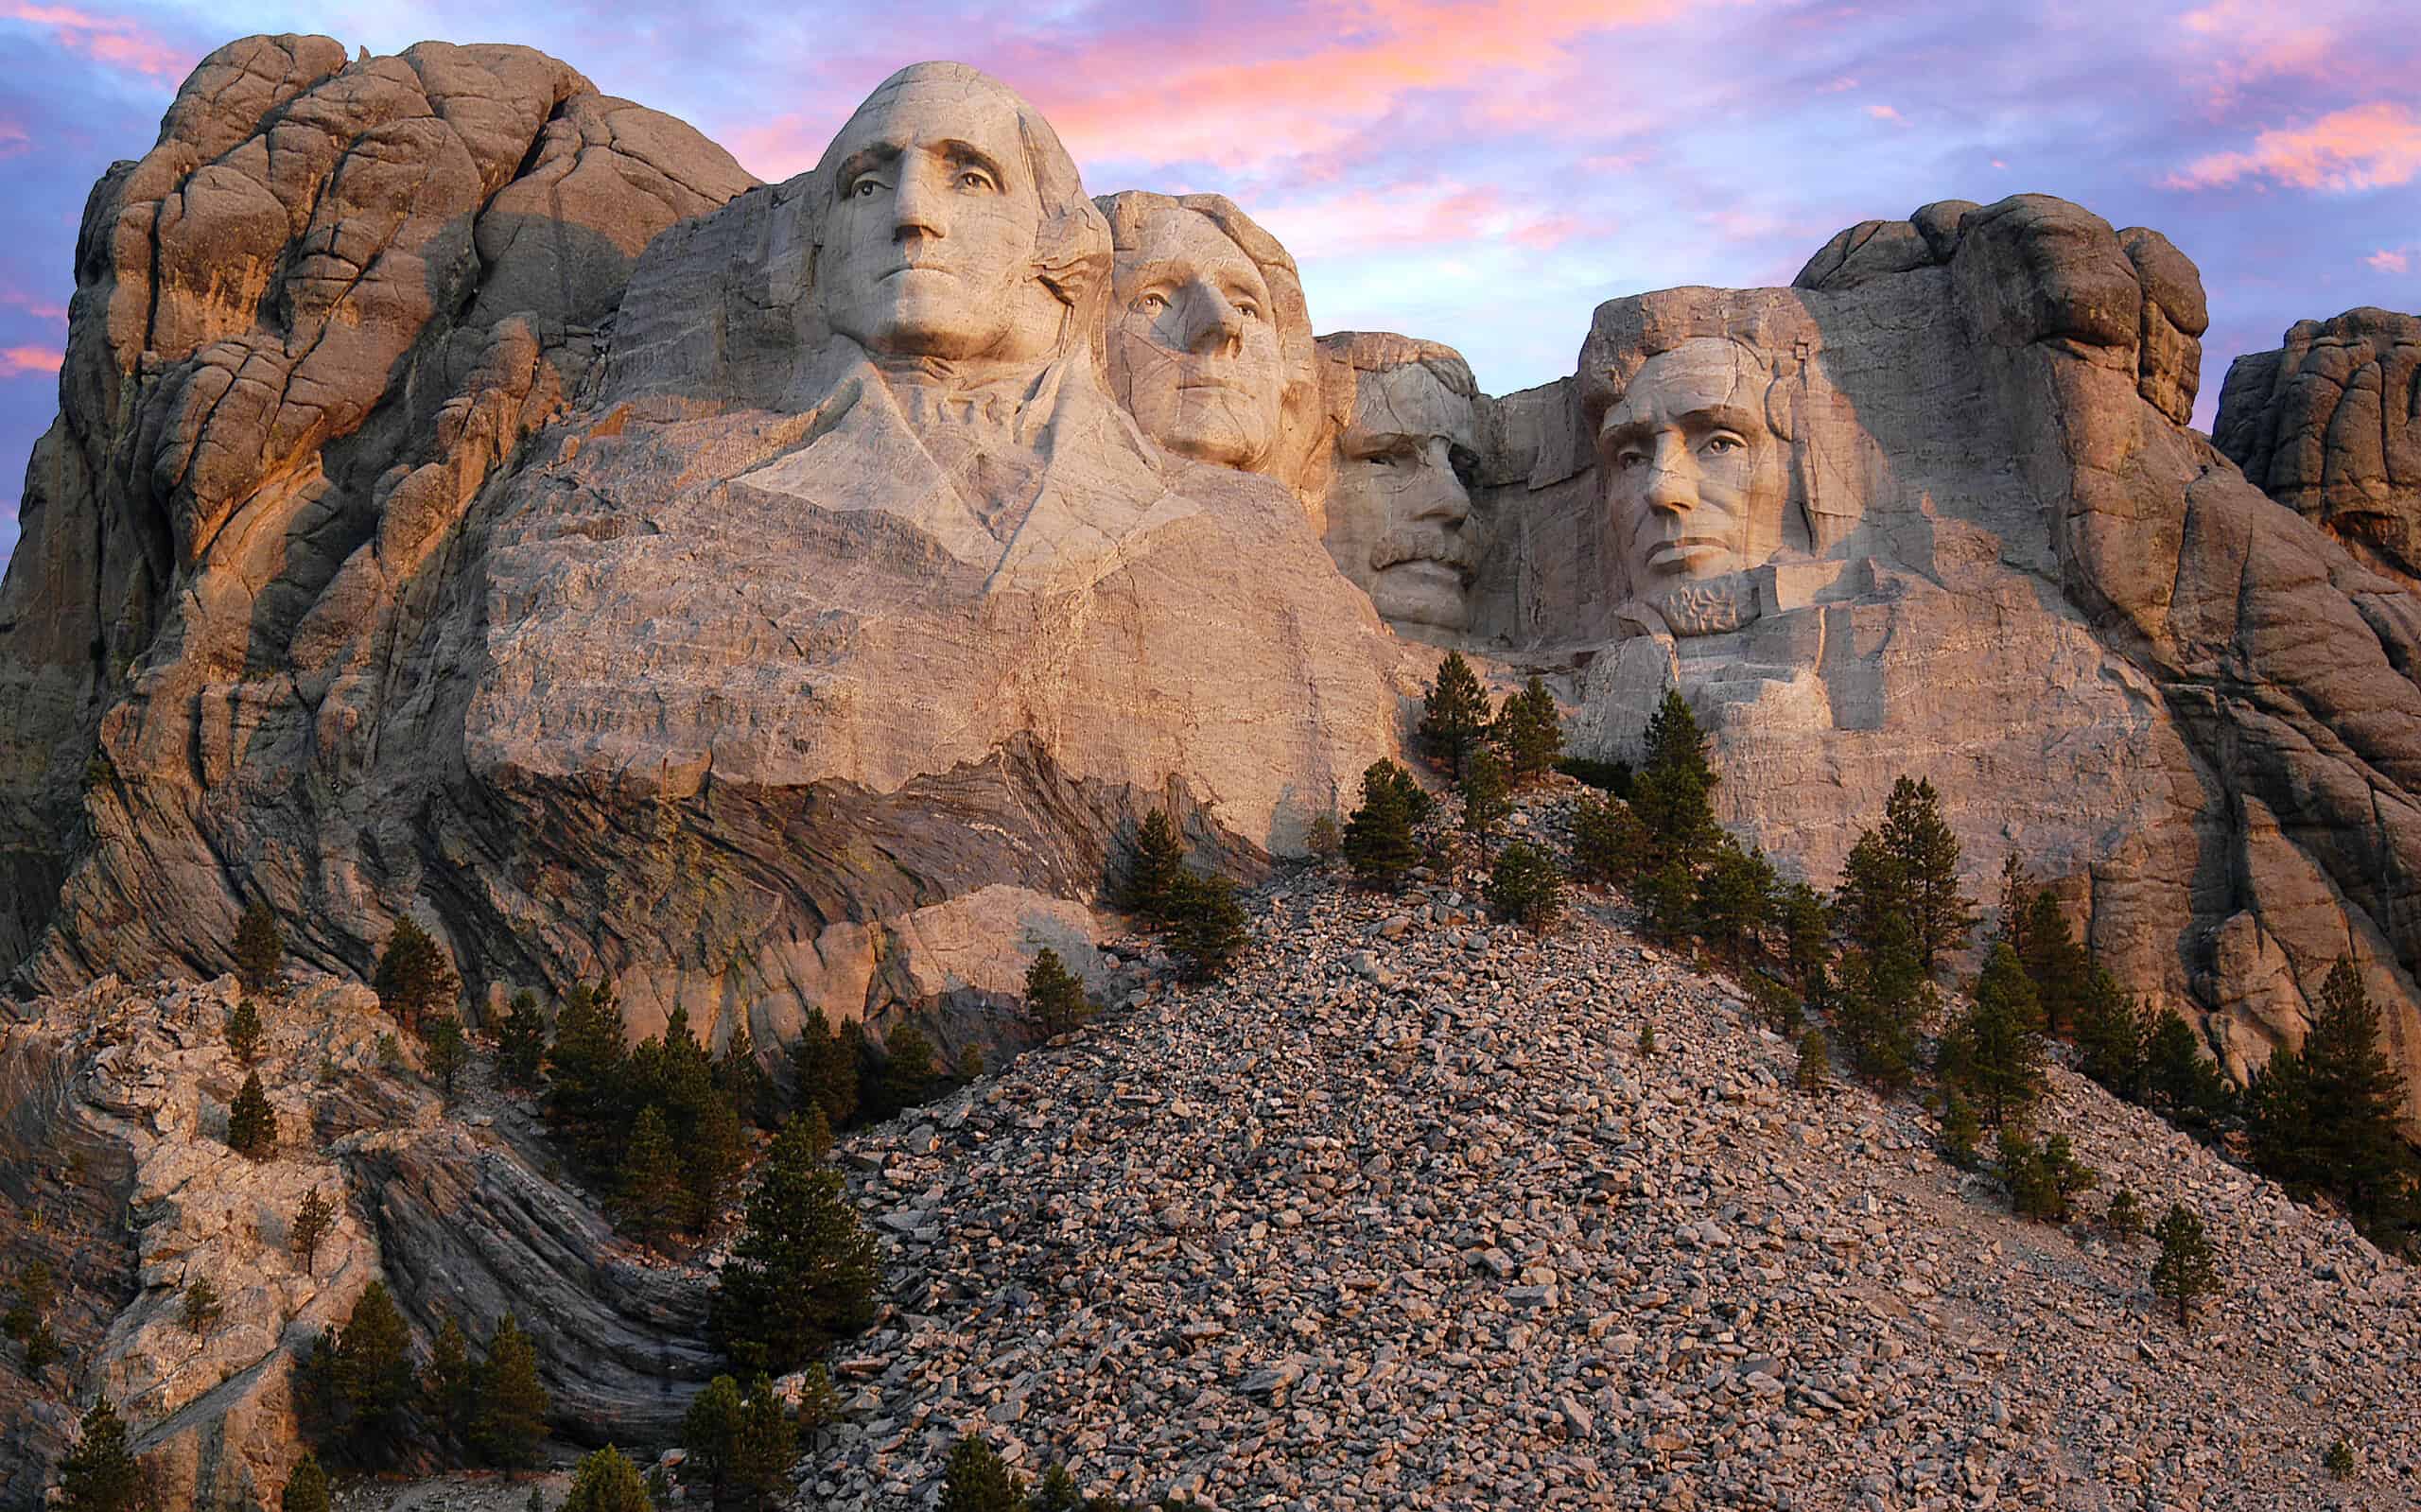 Mount Rushmore morning as the sun begins to light up the mountain range.